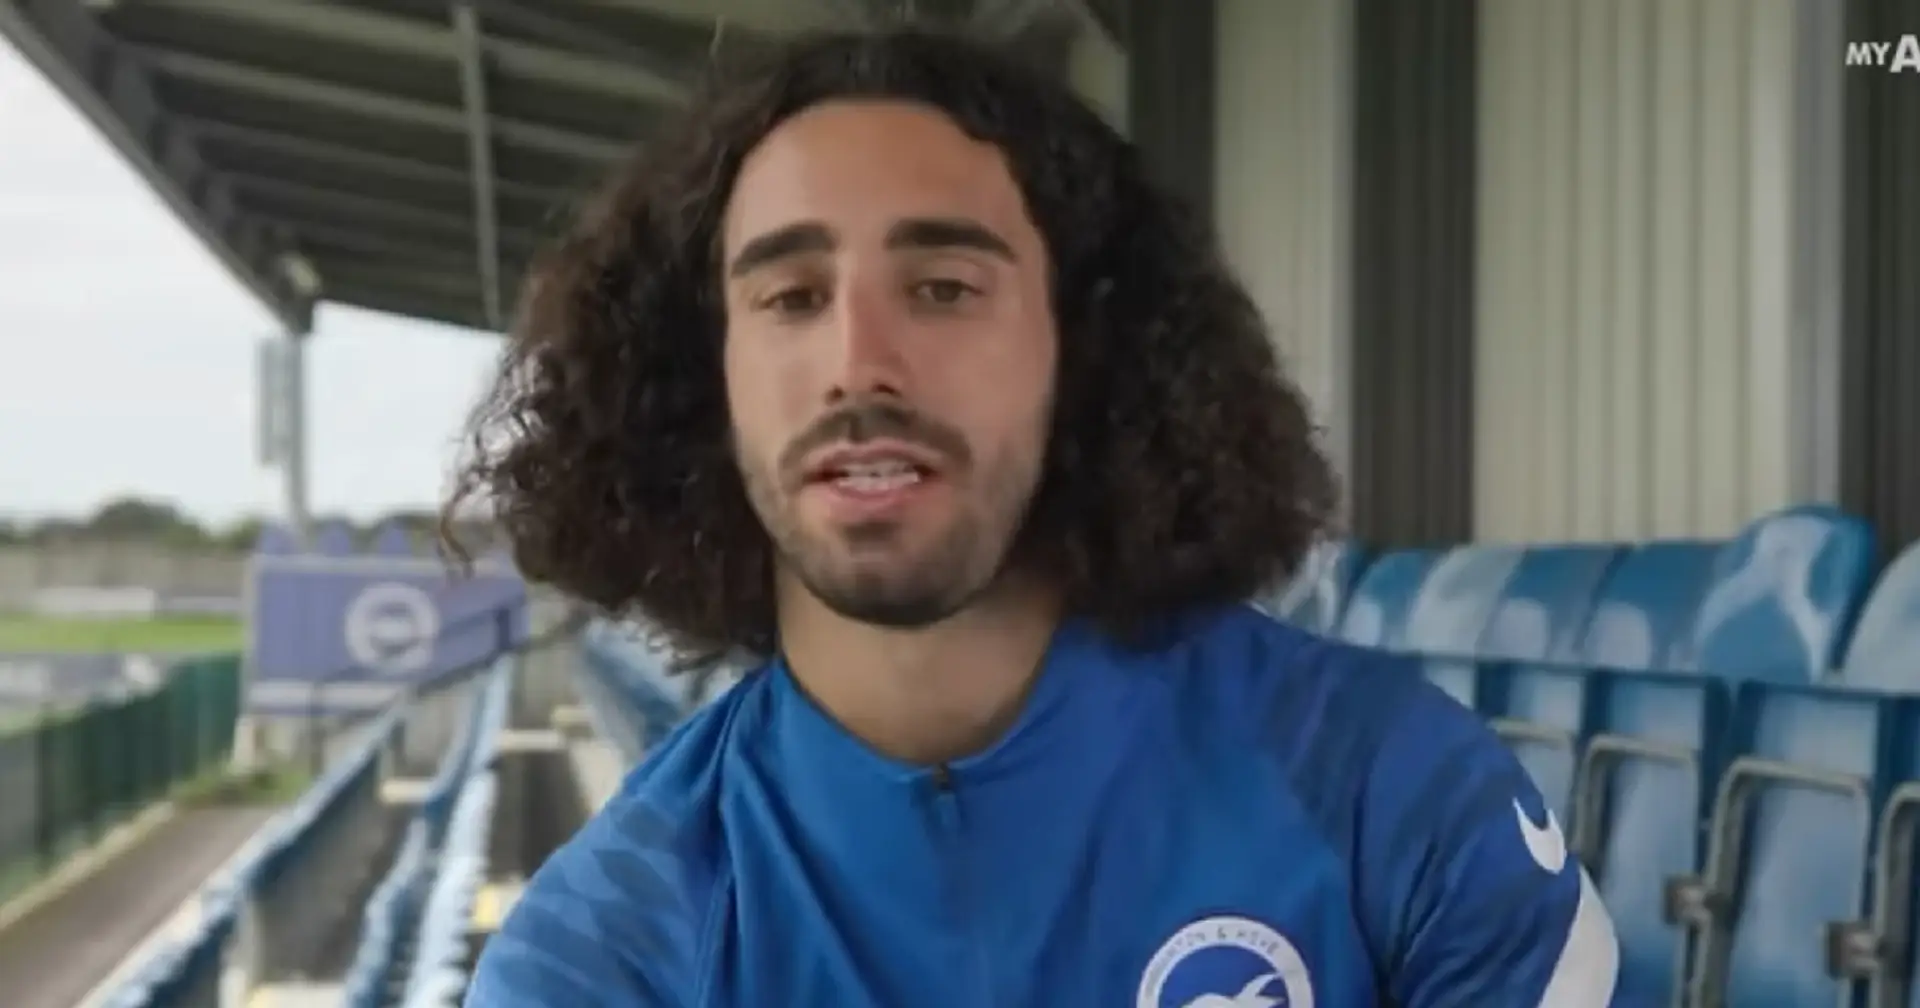 Cucurella gives 2 reasons why he wants to return to Barca: 'I have unfinished business there'